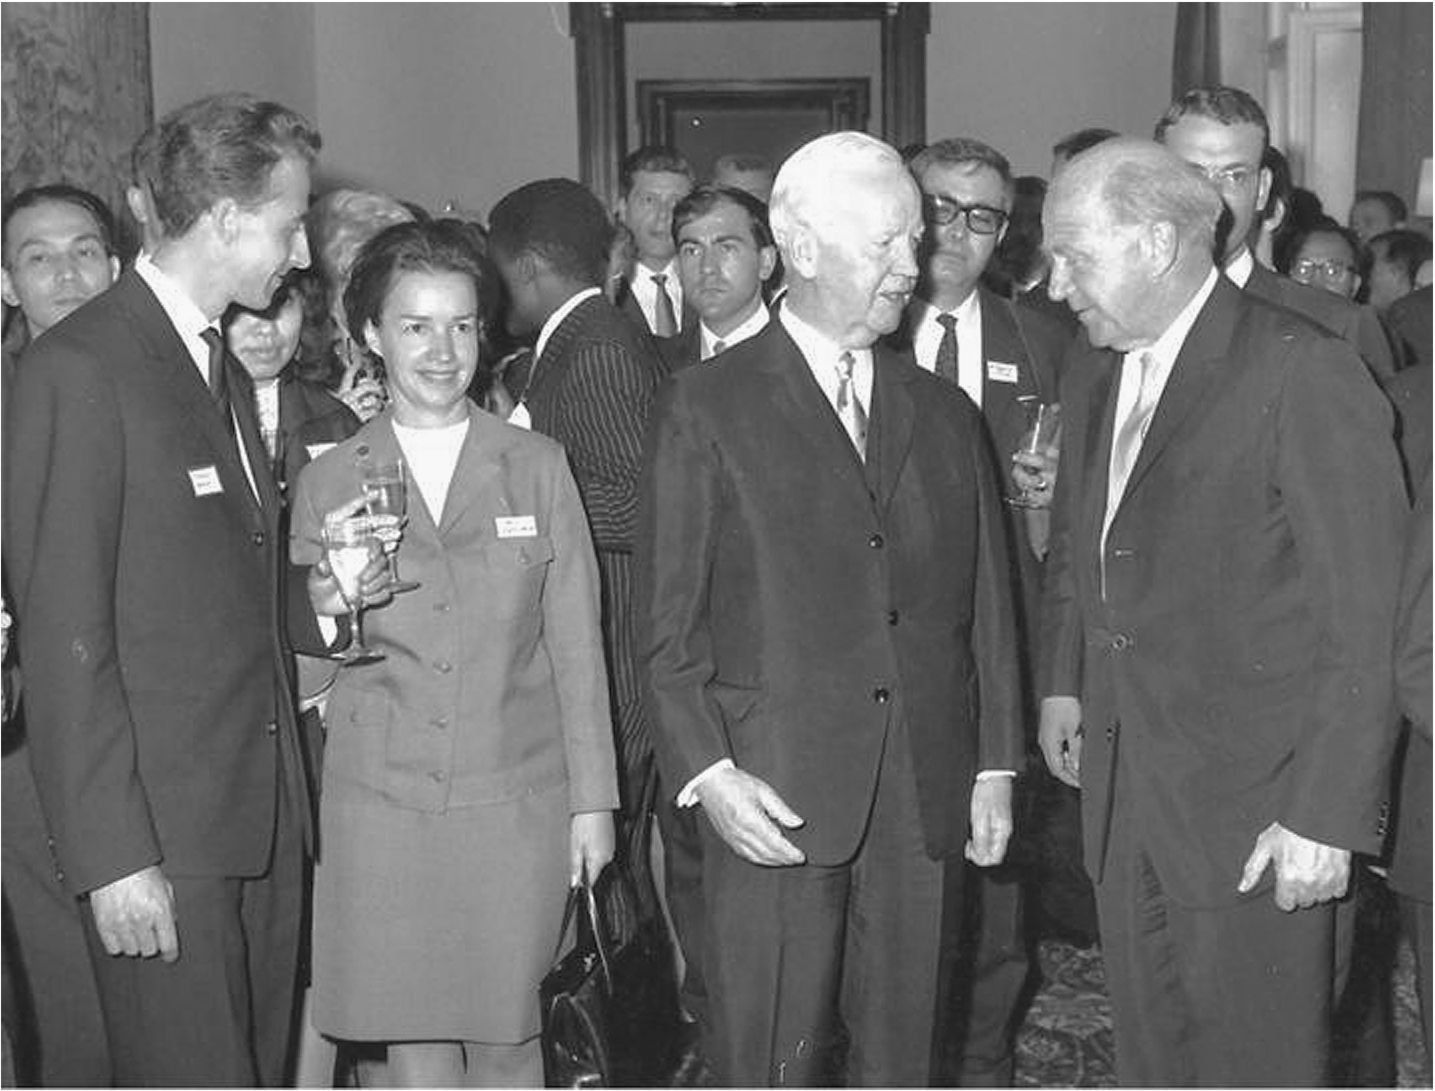 Heisenberg proudly presents his Humboldt family to the President of Germany at a reception in the German White House in Bonn in July 1966. Foreground, left to right: The author, an unknown female Humboldt Fellow, Heinrich Luebke (German President), Werner Heisenberg; Background: Other Humboldt Fellows, vintage 1966. Note that while Heisenberg and the President had dropped their champagne glasses when the photograph was taken, this inexperienced youngster is still holding on to his glass (personal photograph).